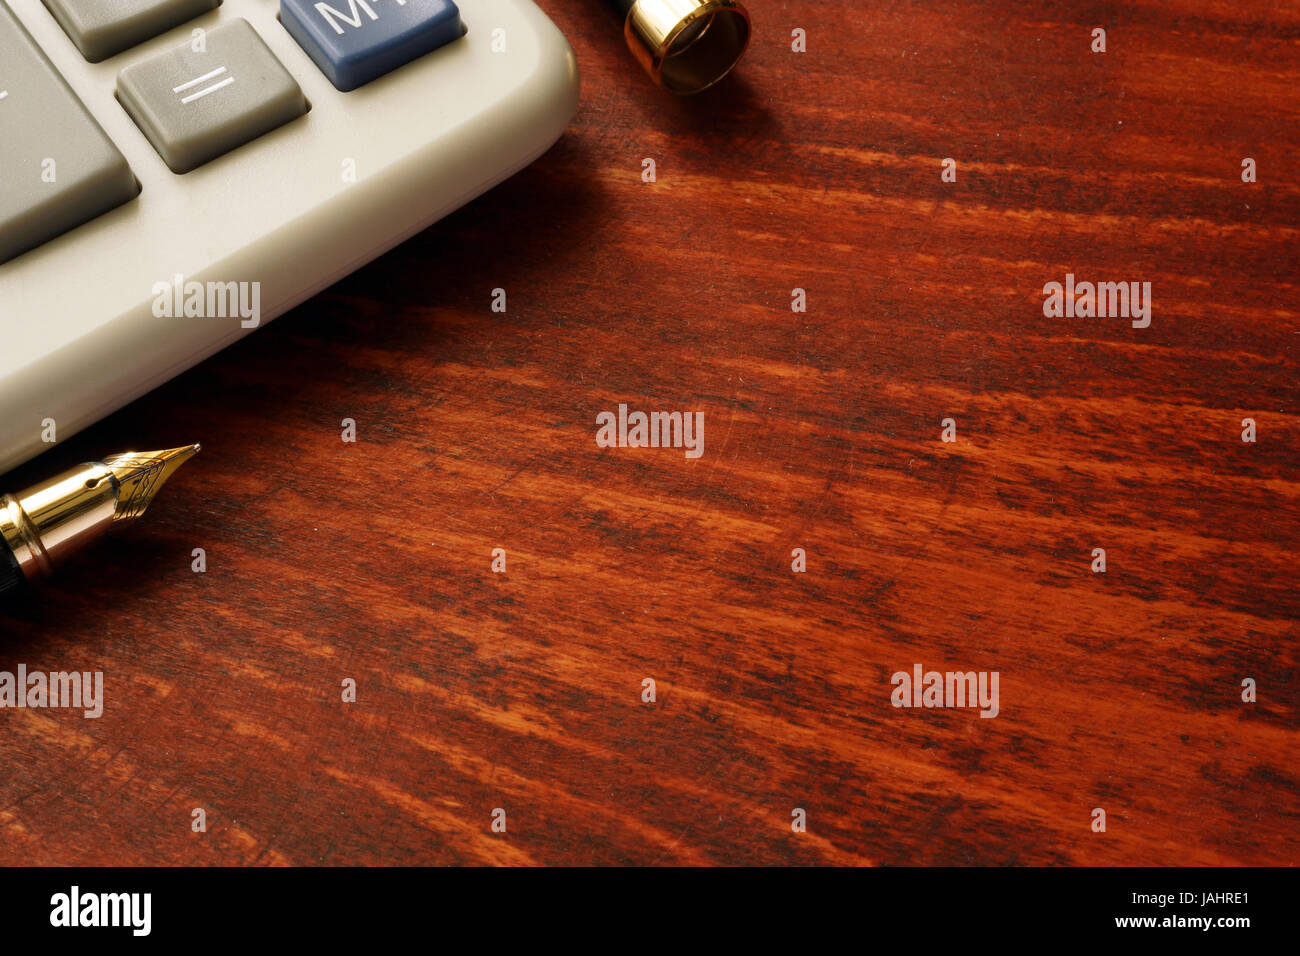 Calculator on a wooden table. Business background. Stock Photo